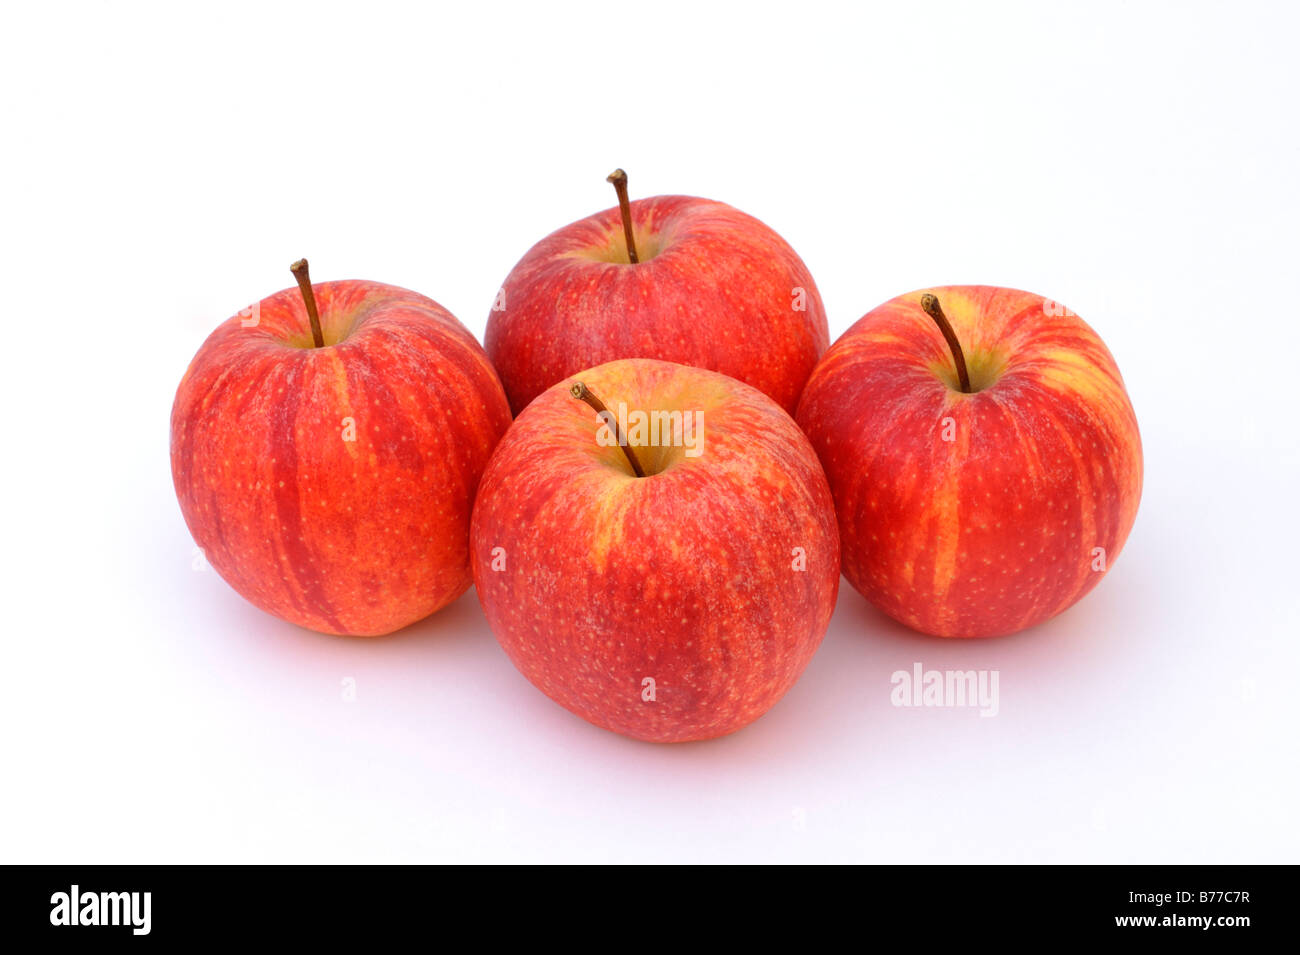 Red apples, Gala brand Stock Photo